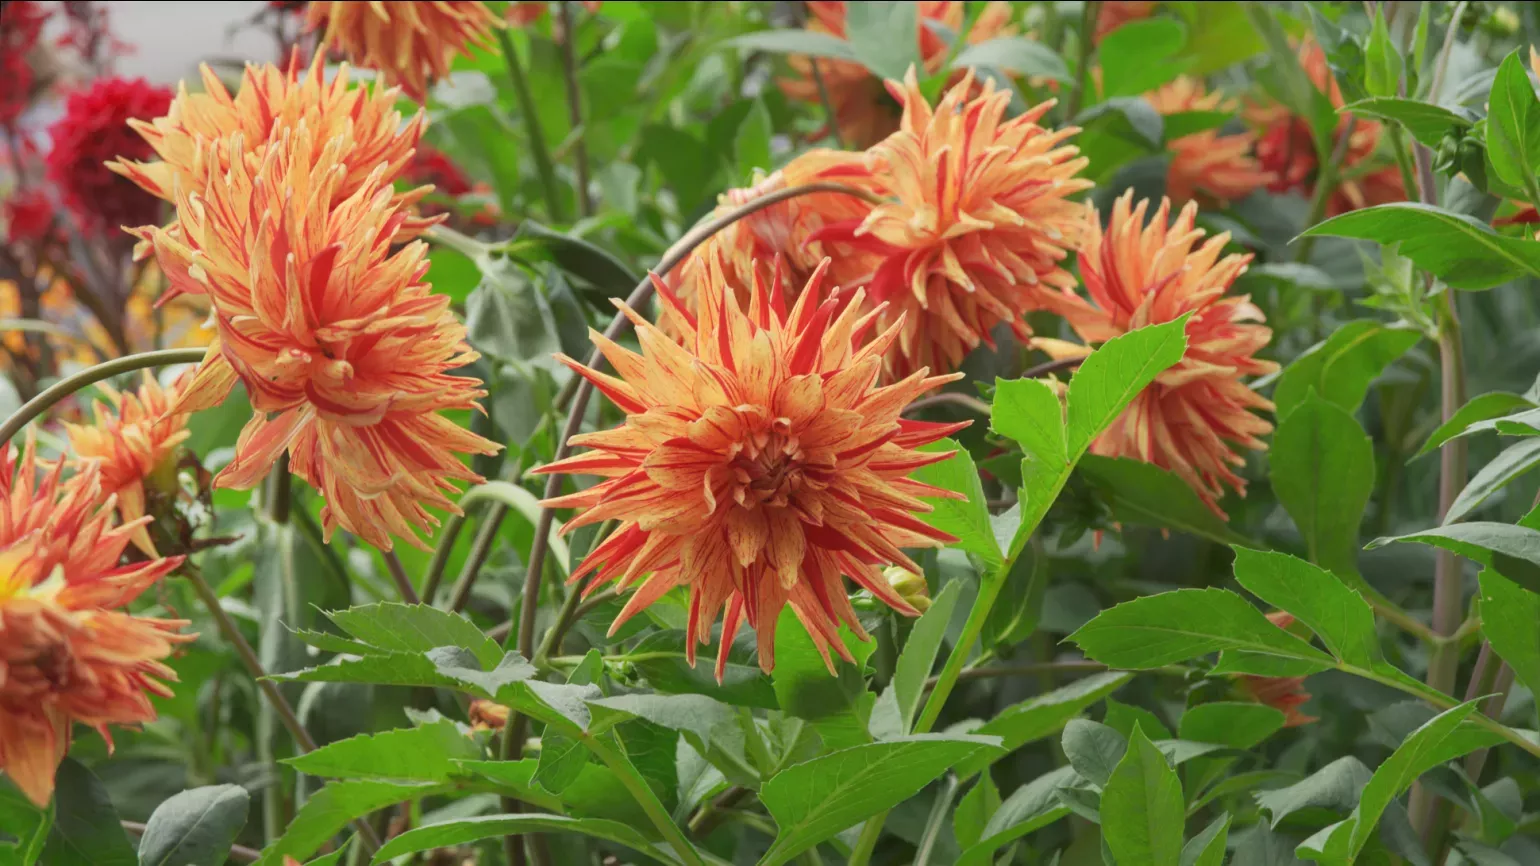 A cluster of thin petaled red and orange flowers